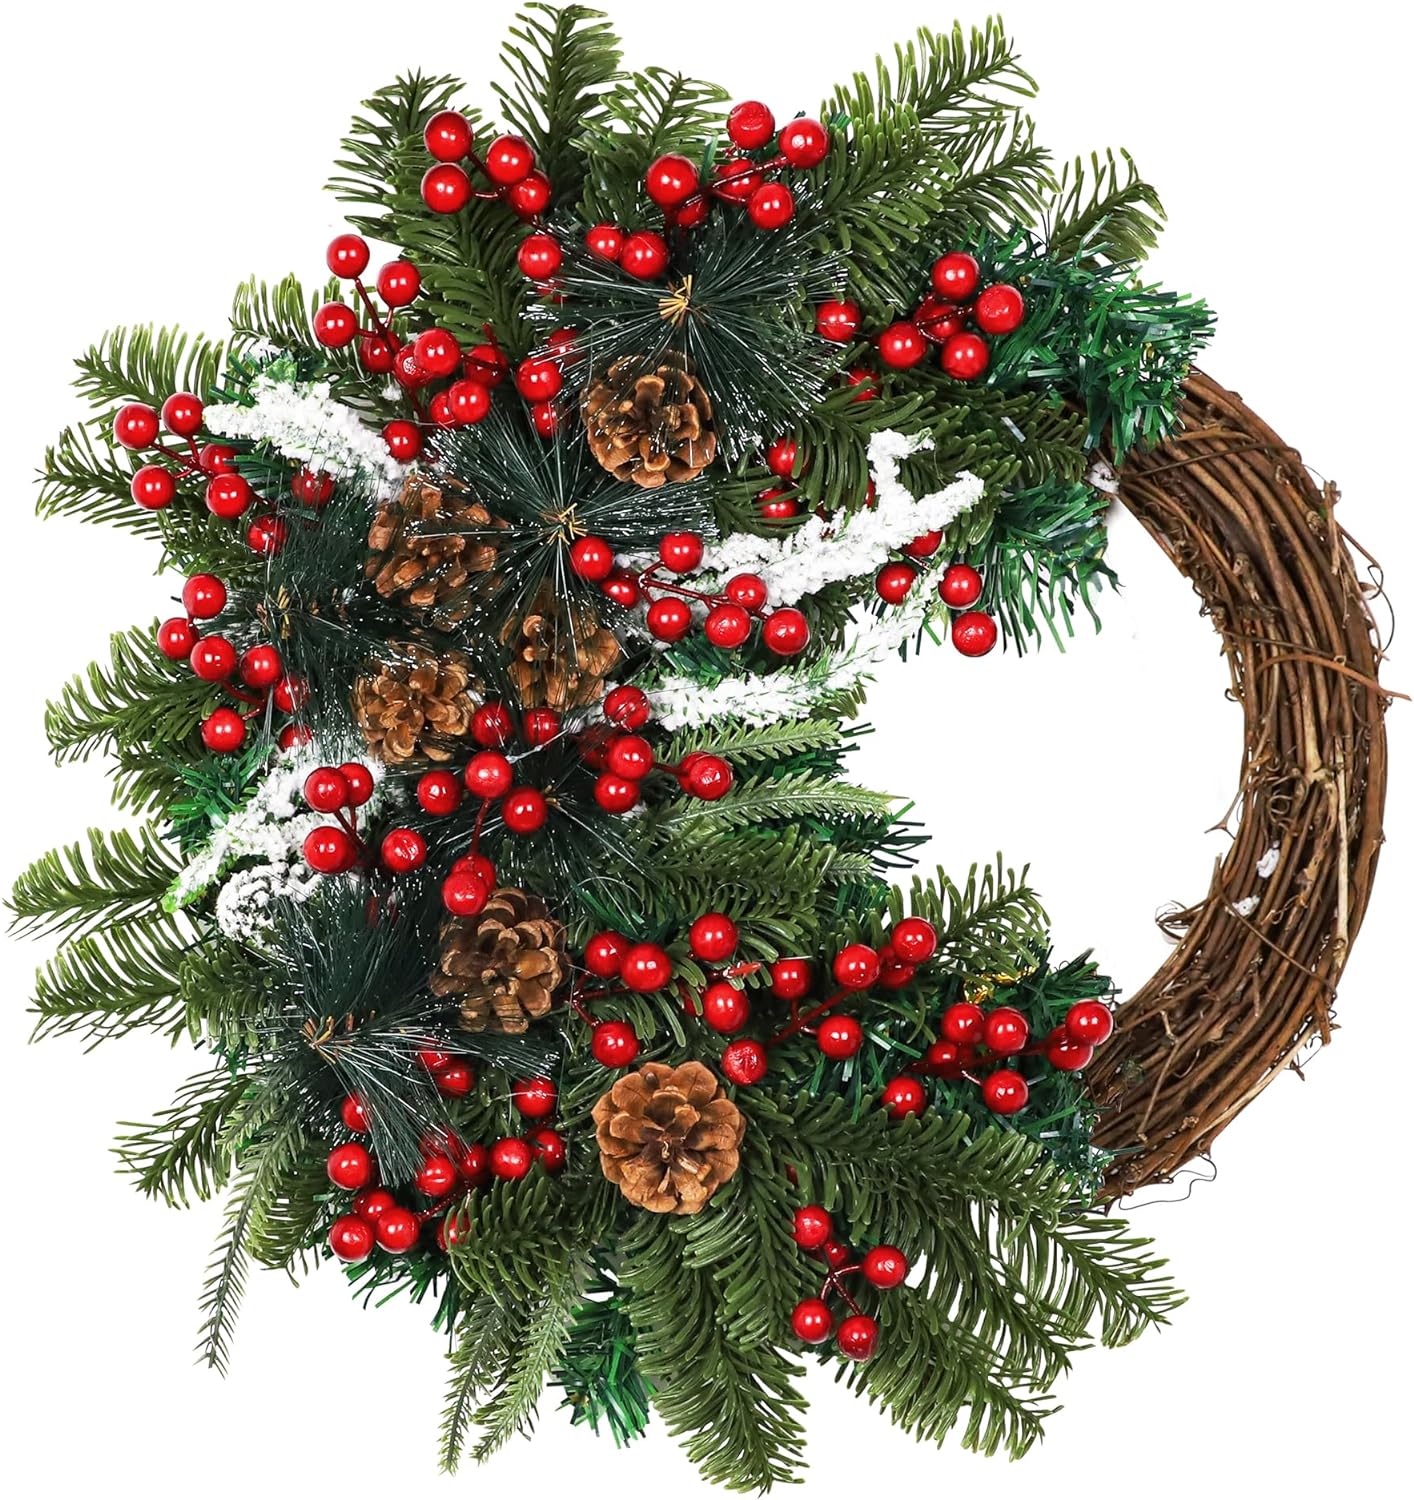 rustic farmhouse christmas wreaths for the front door